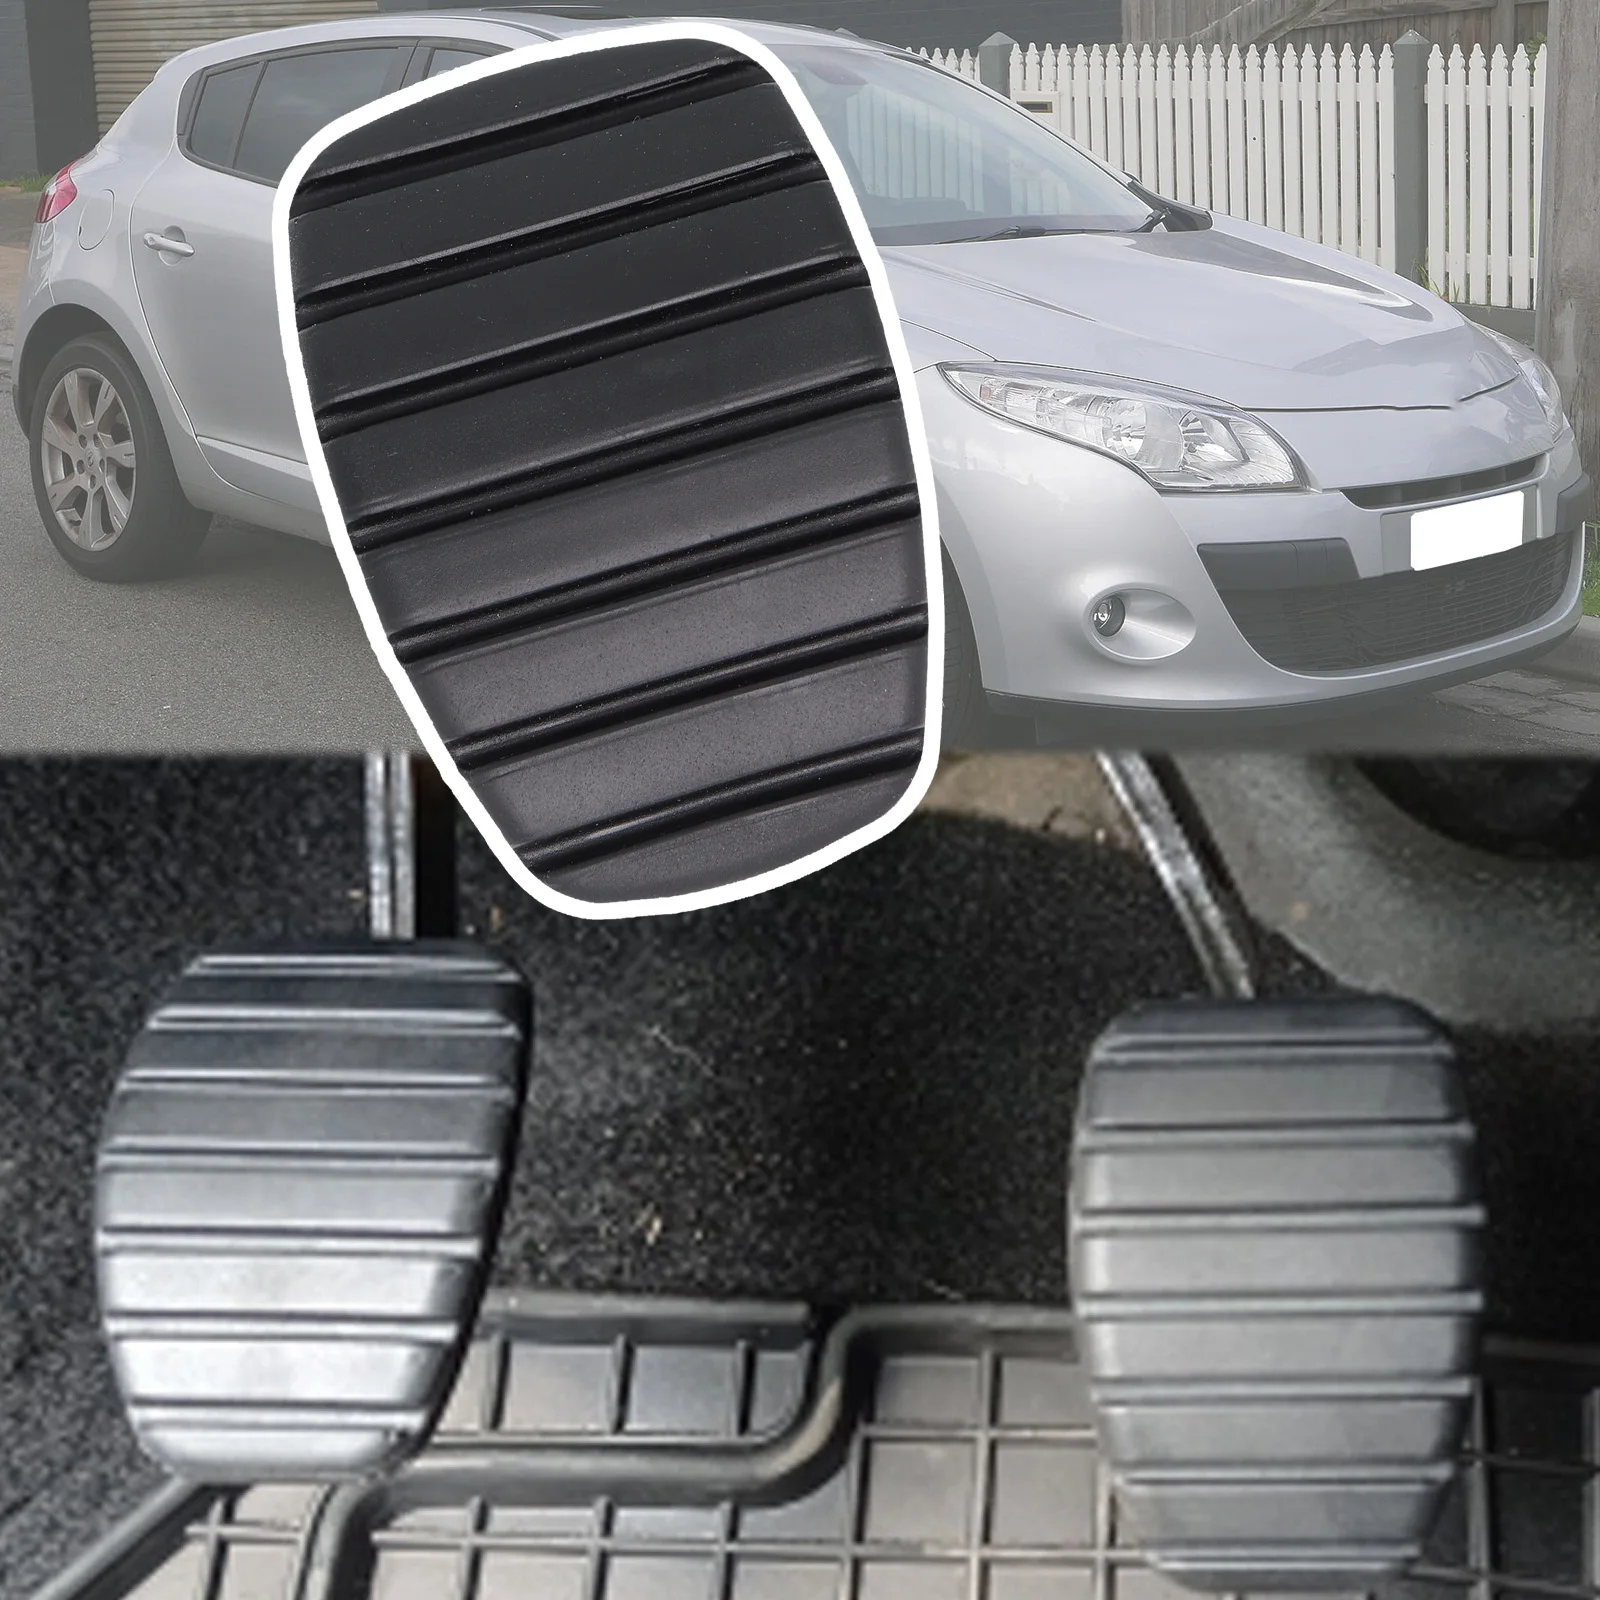 Rubber Brake Clutch Foot Pedal Pad Part Covers For Renault Megane 2 Scal... - $12.24+